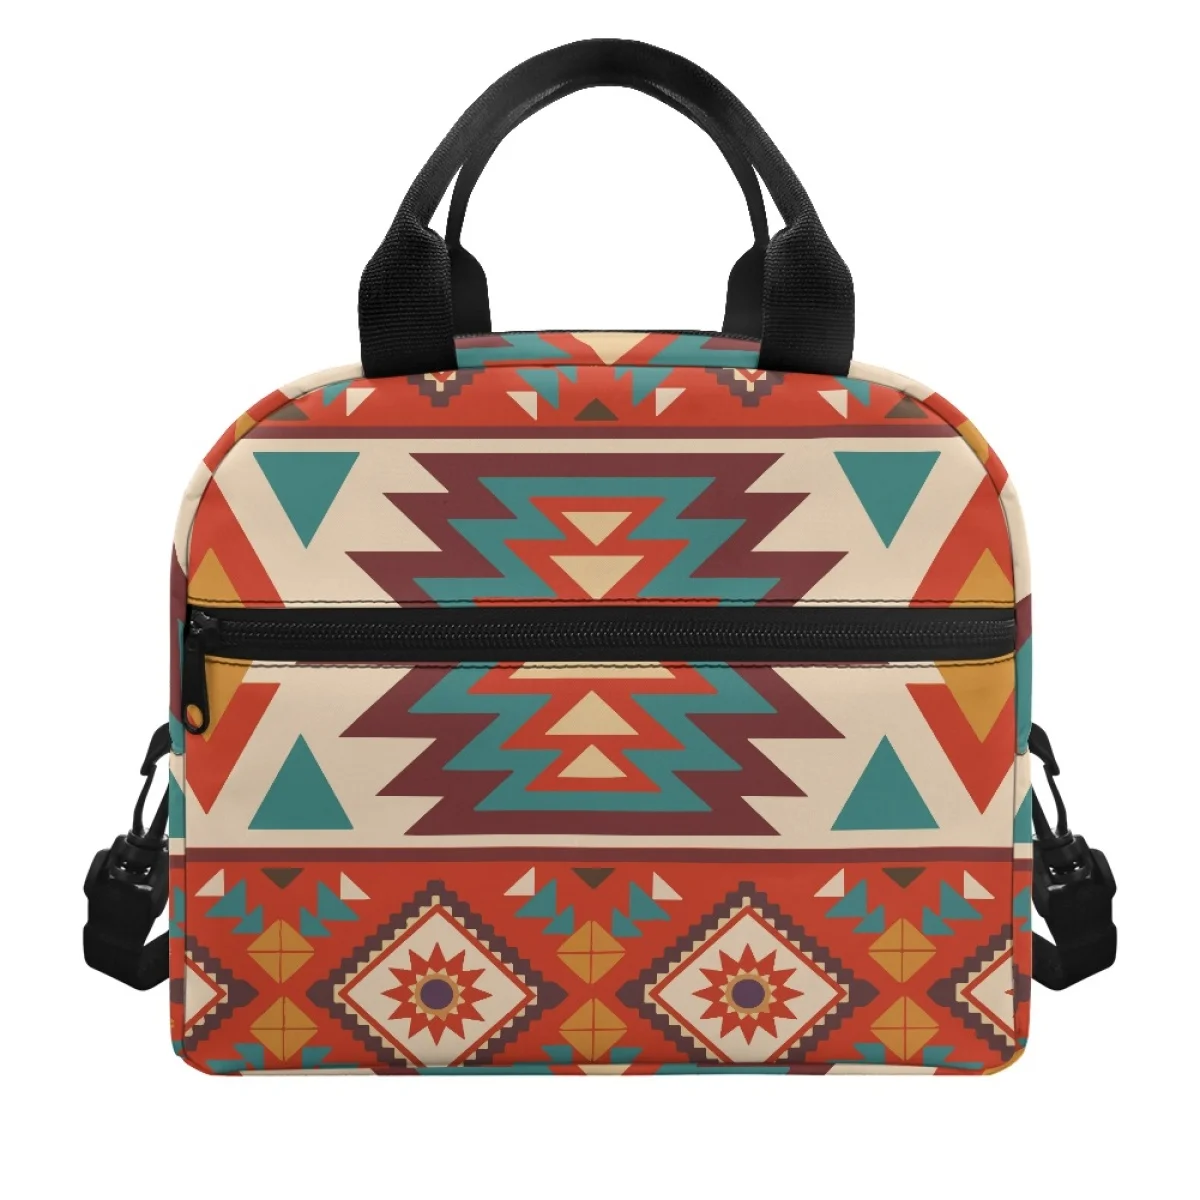 

FORUDESIGNS Tribal Ethnic Style Lunch Box for Women Stylish Beautiful Thermal Lunchbox Lightweight Multiple Pockets Picnic